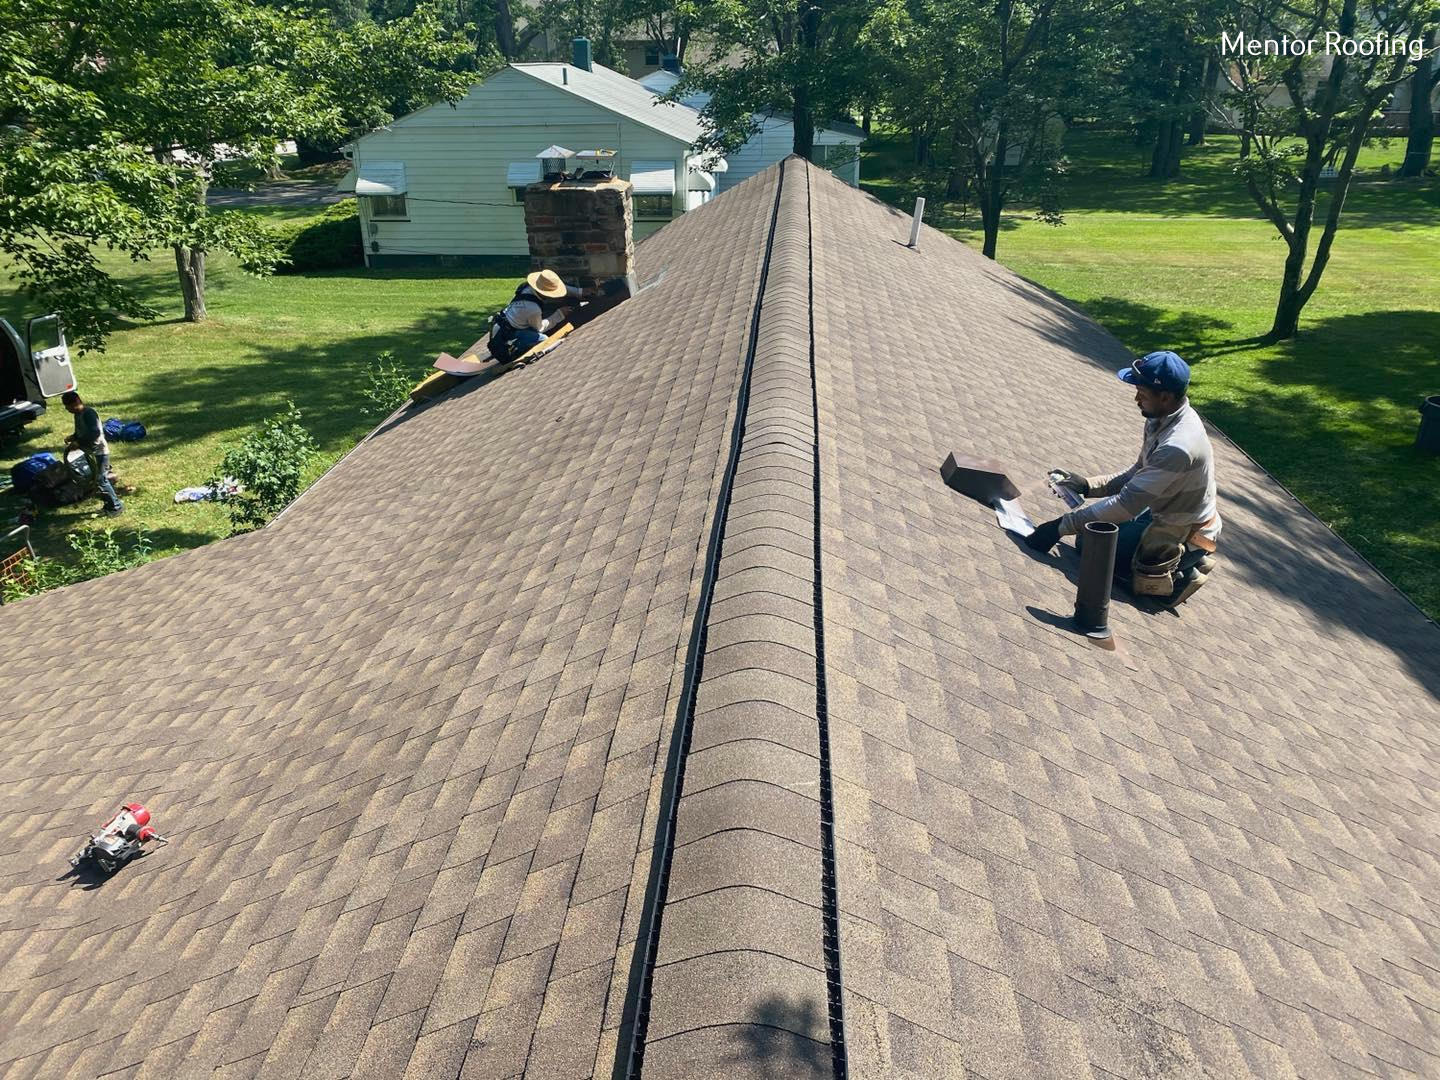 Walker Roofing & Construction LLC - Mentor Roofing Contractor Is an Elite Roofing Contractor in Mentor, OH 